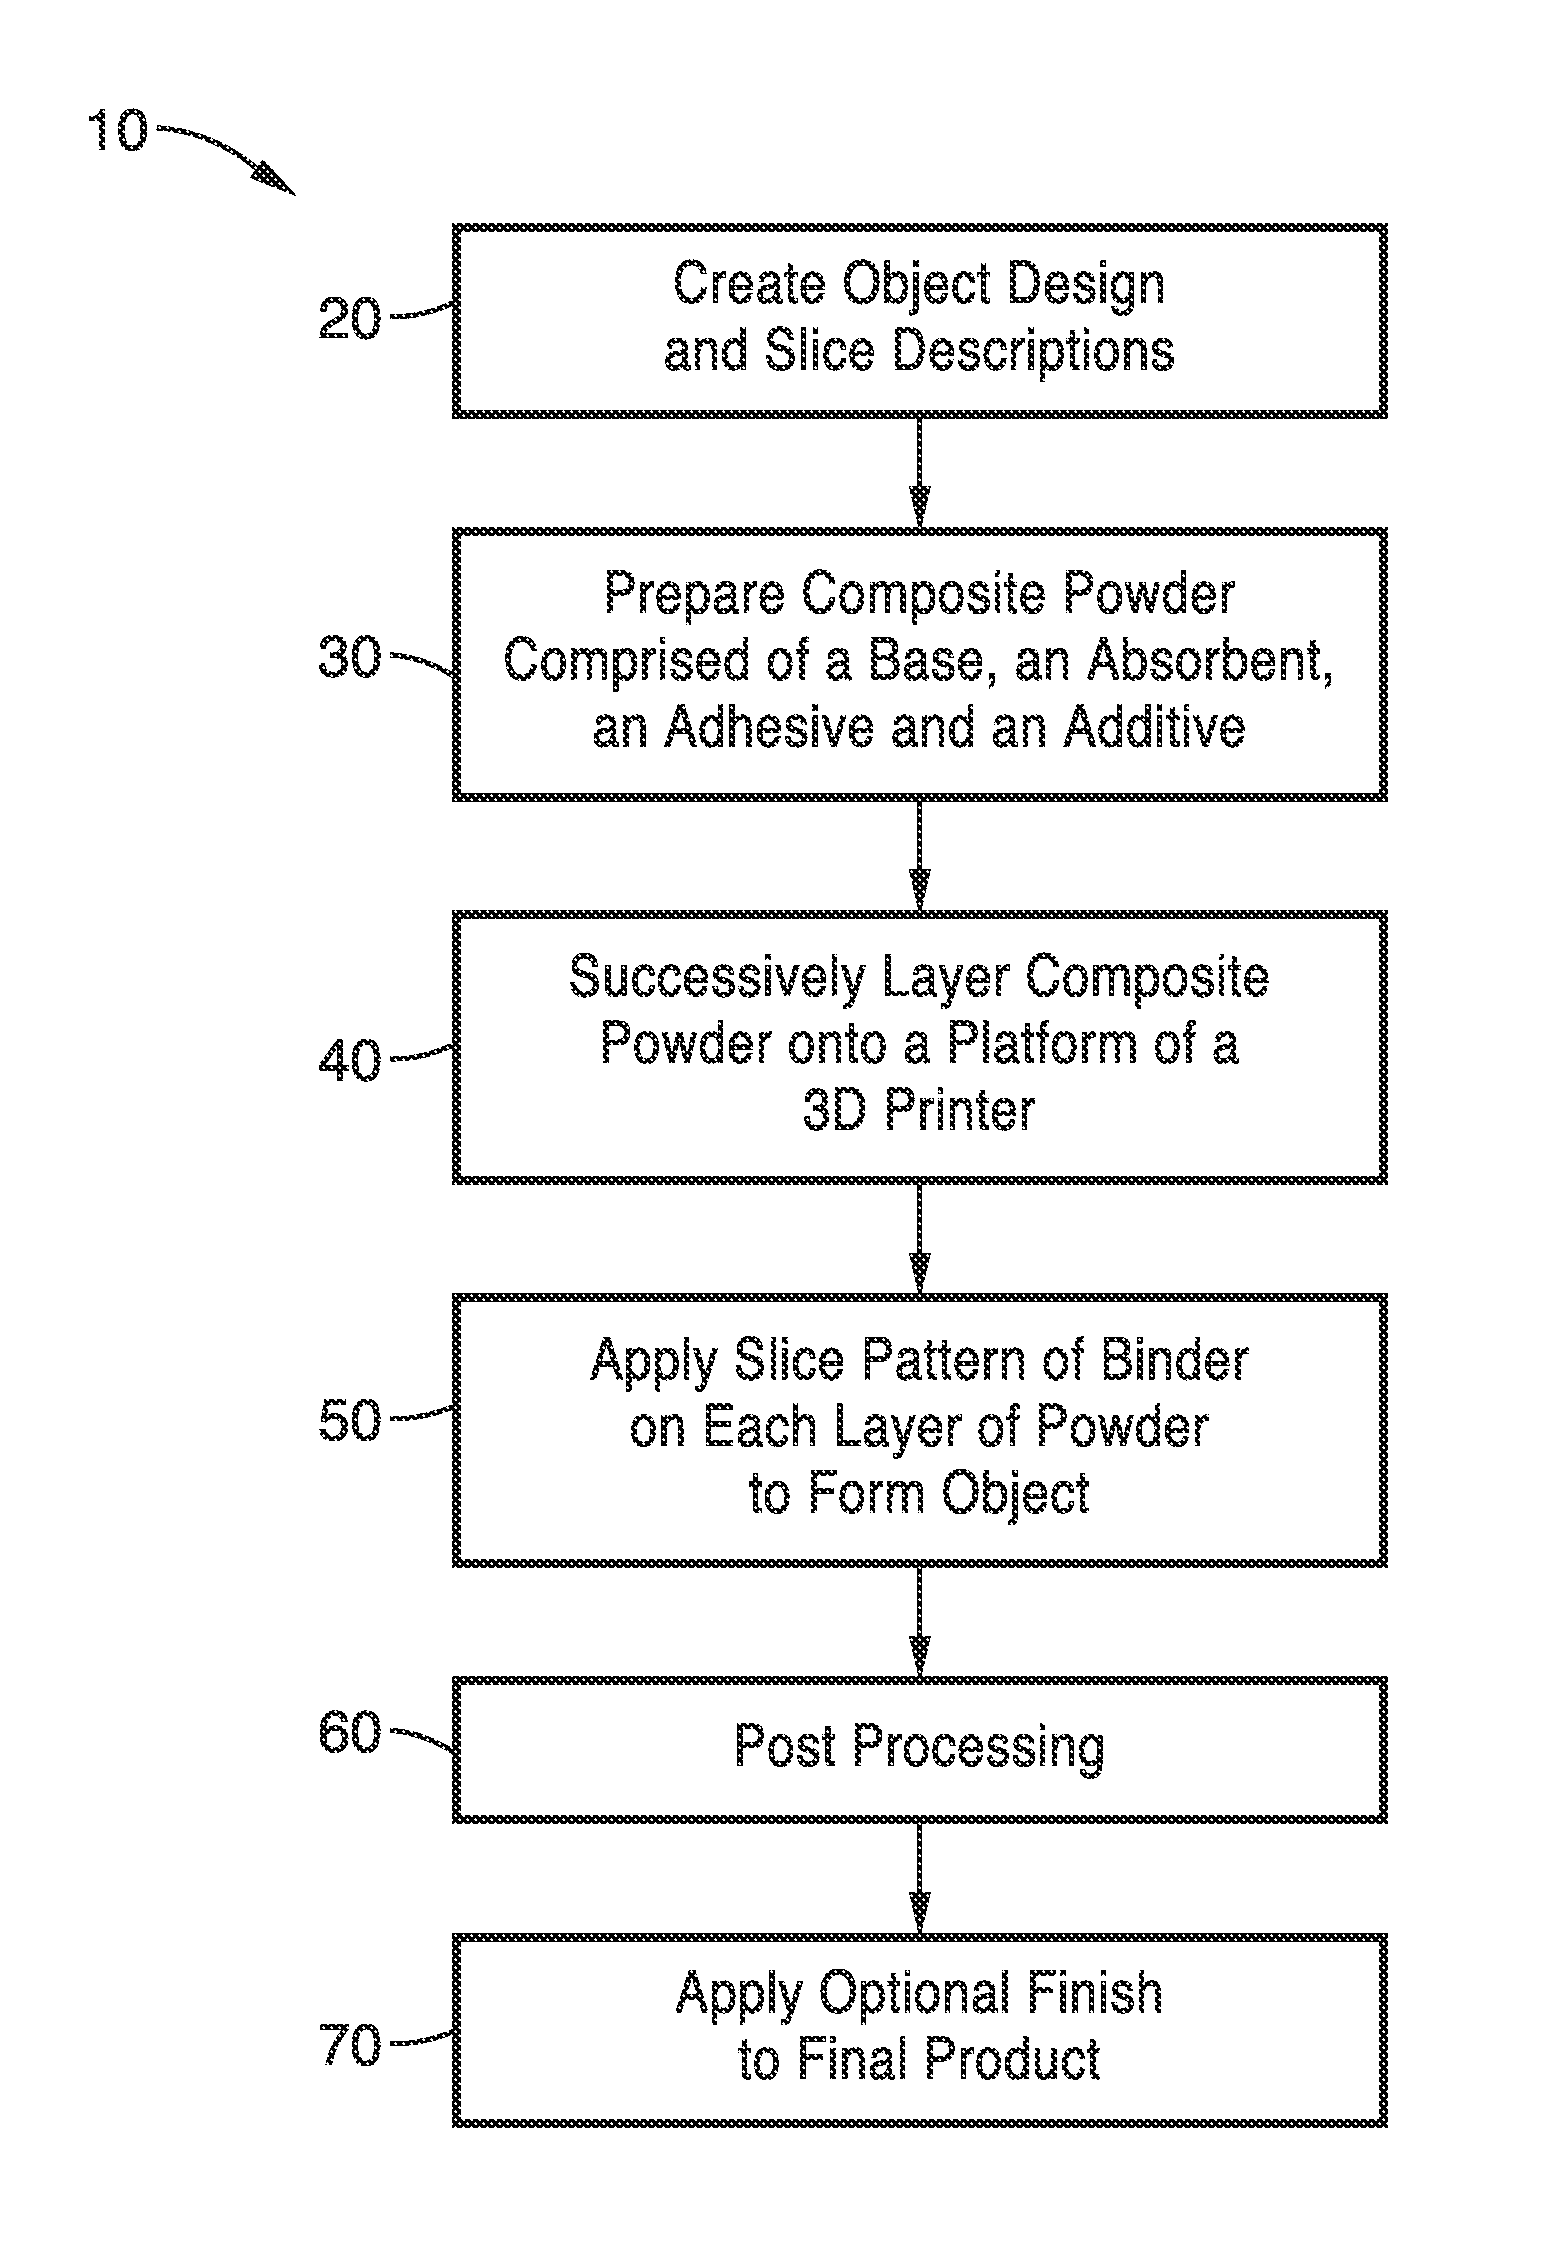 3D printing powder compositions and methods of use